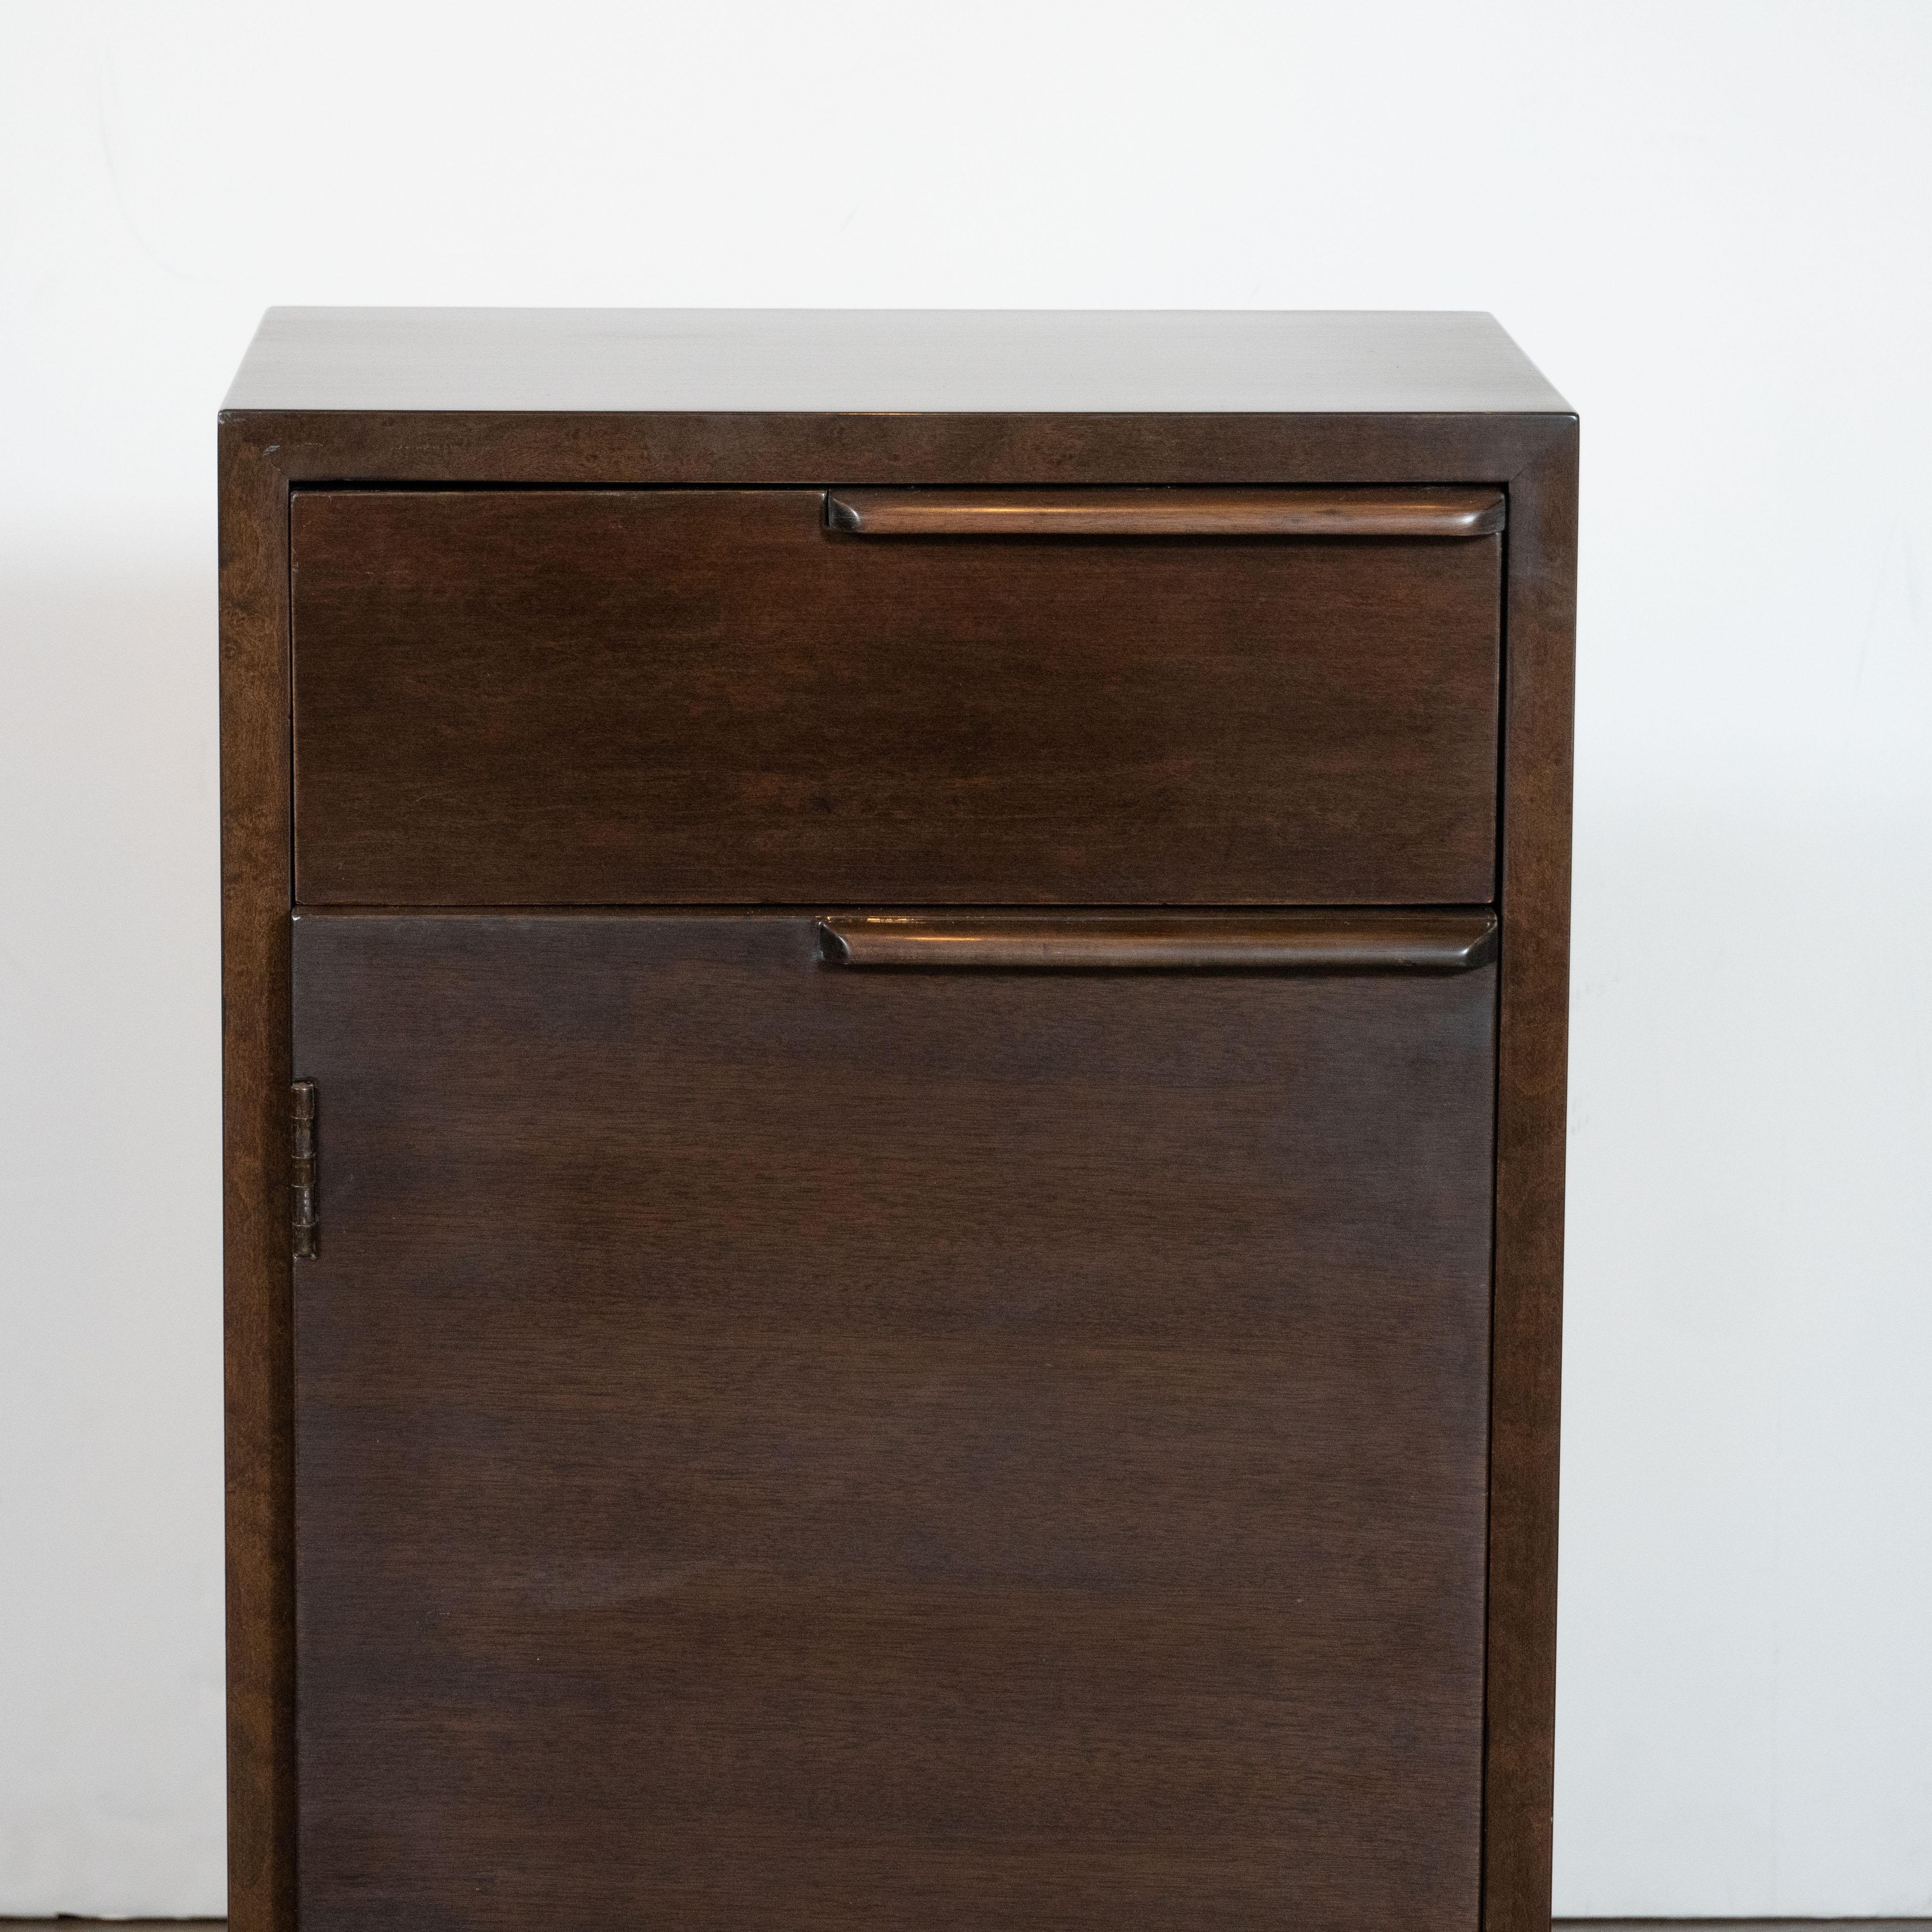 This elegant and understated nightstand was realized by Gilbert Rohde, one of the most celebrated and influential designers of the 20th century in the United States- in 1936. Handcrafted in Zeeland, Michigan, the piece features a volumetric